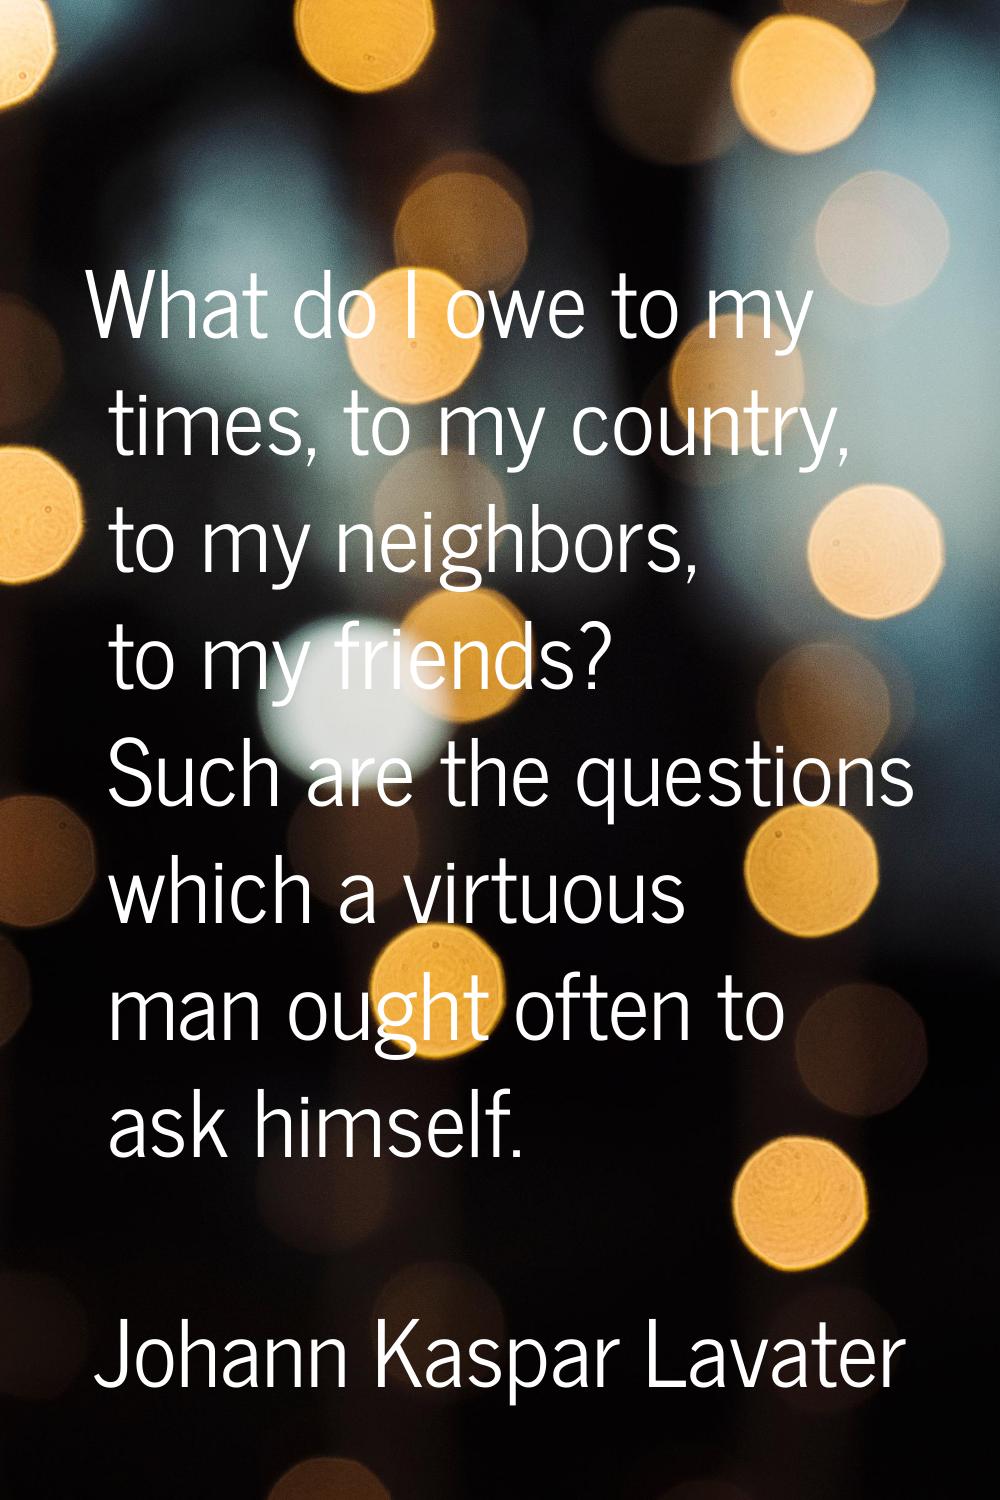 What do I owe to my times, to my country, to my neighbors, to my friends? Such are the questions wh